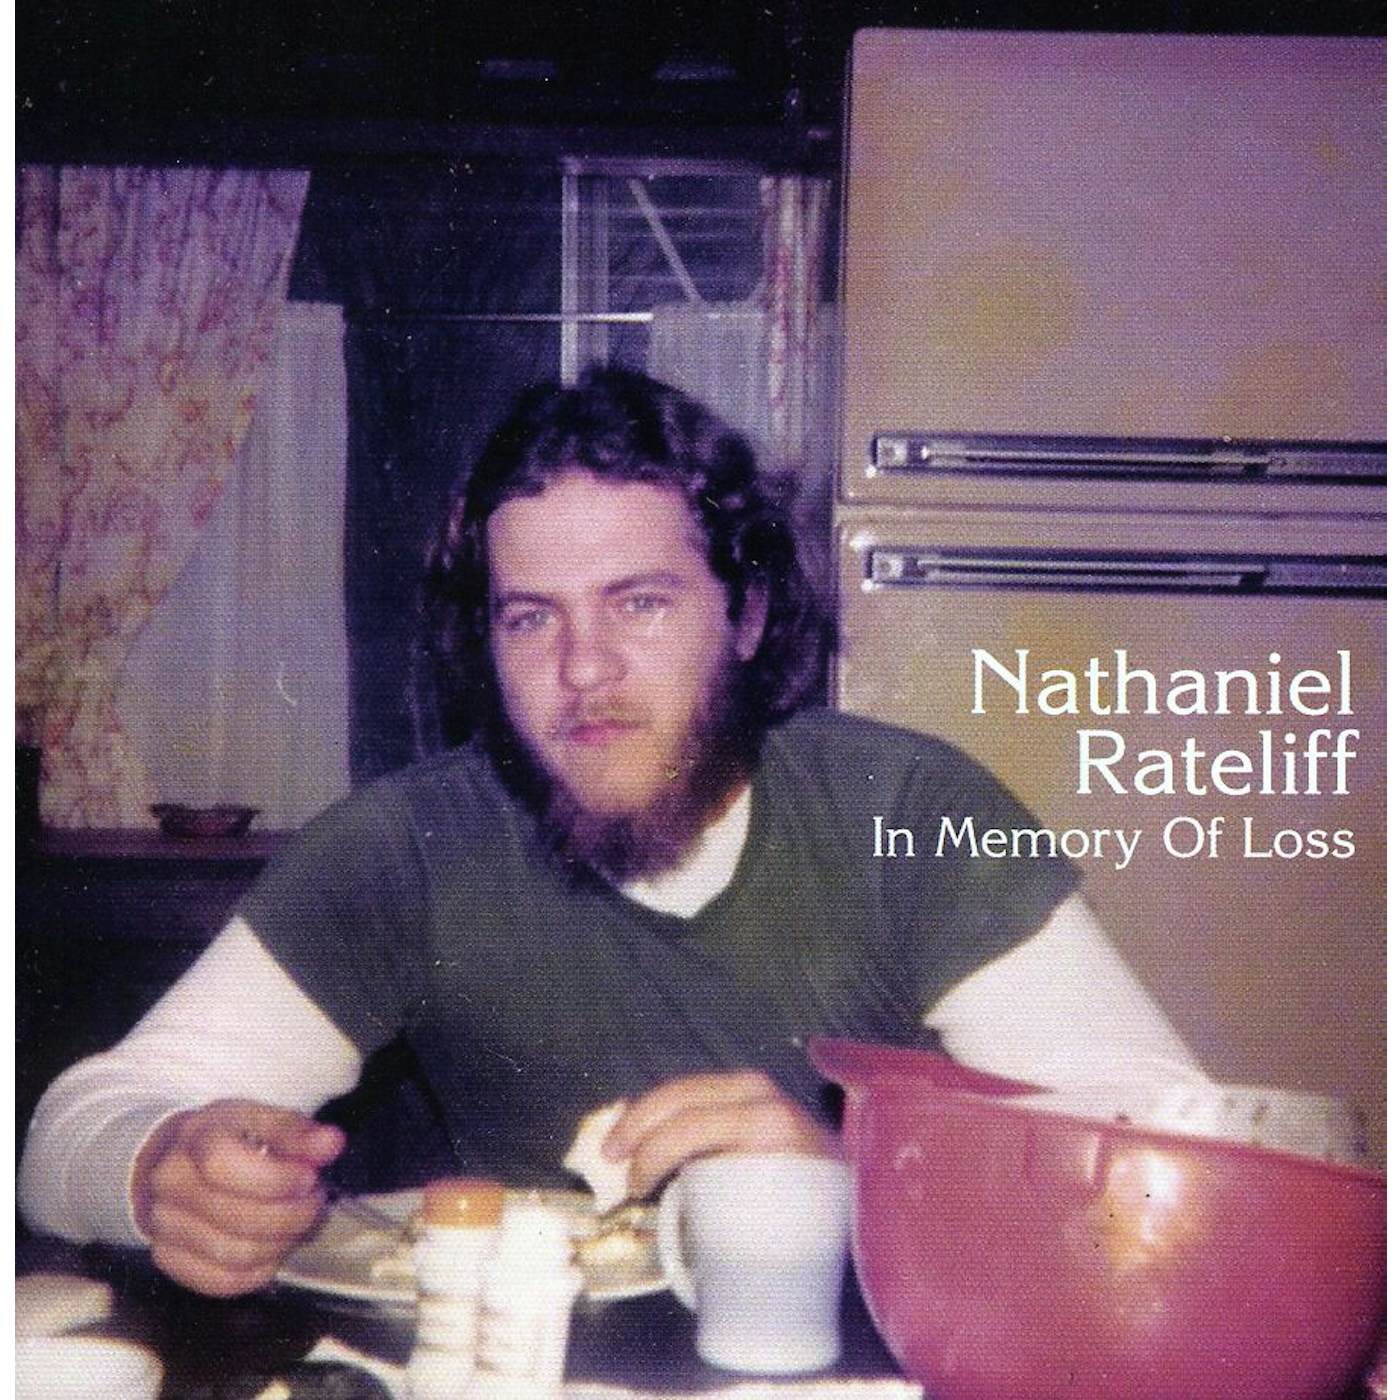 Nathaniel Rateliff IN MEMORY OF LOSS CD